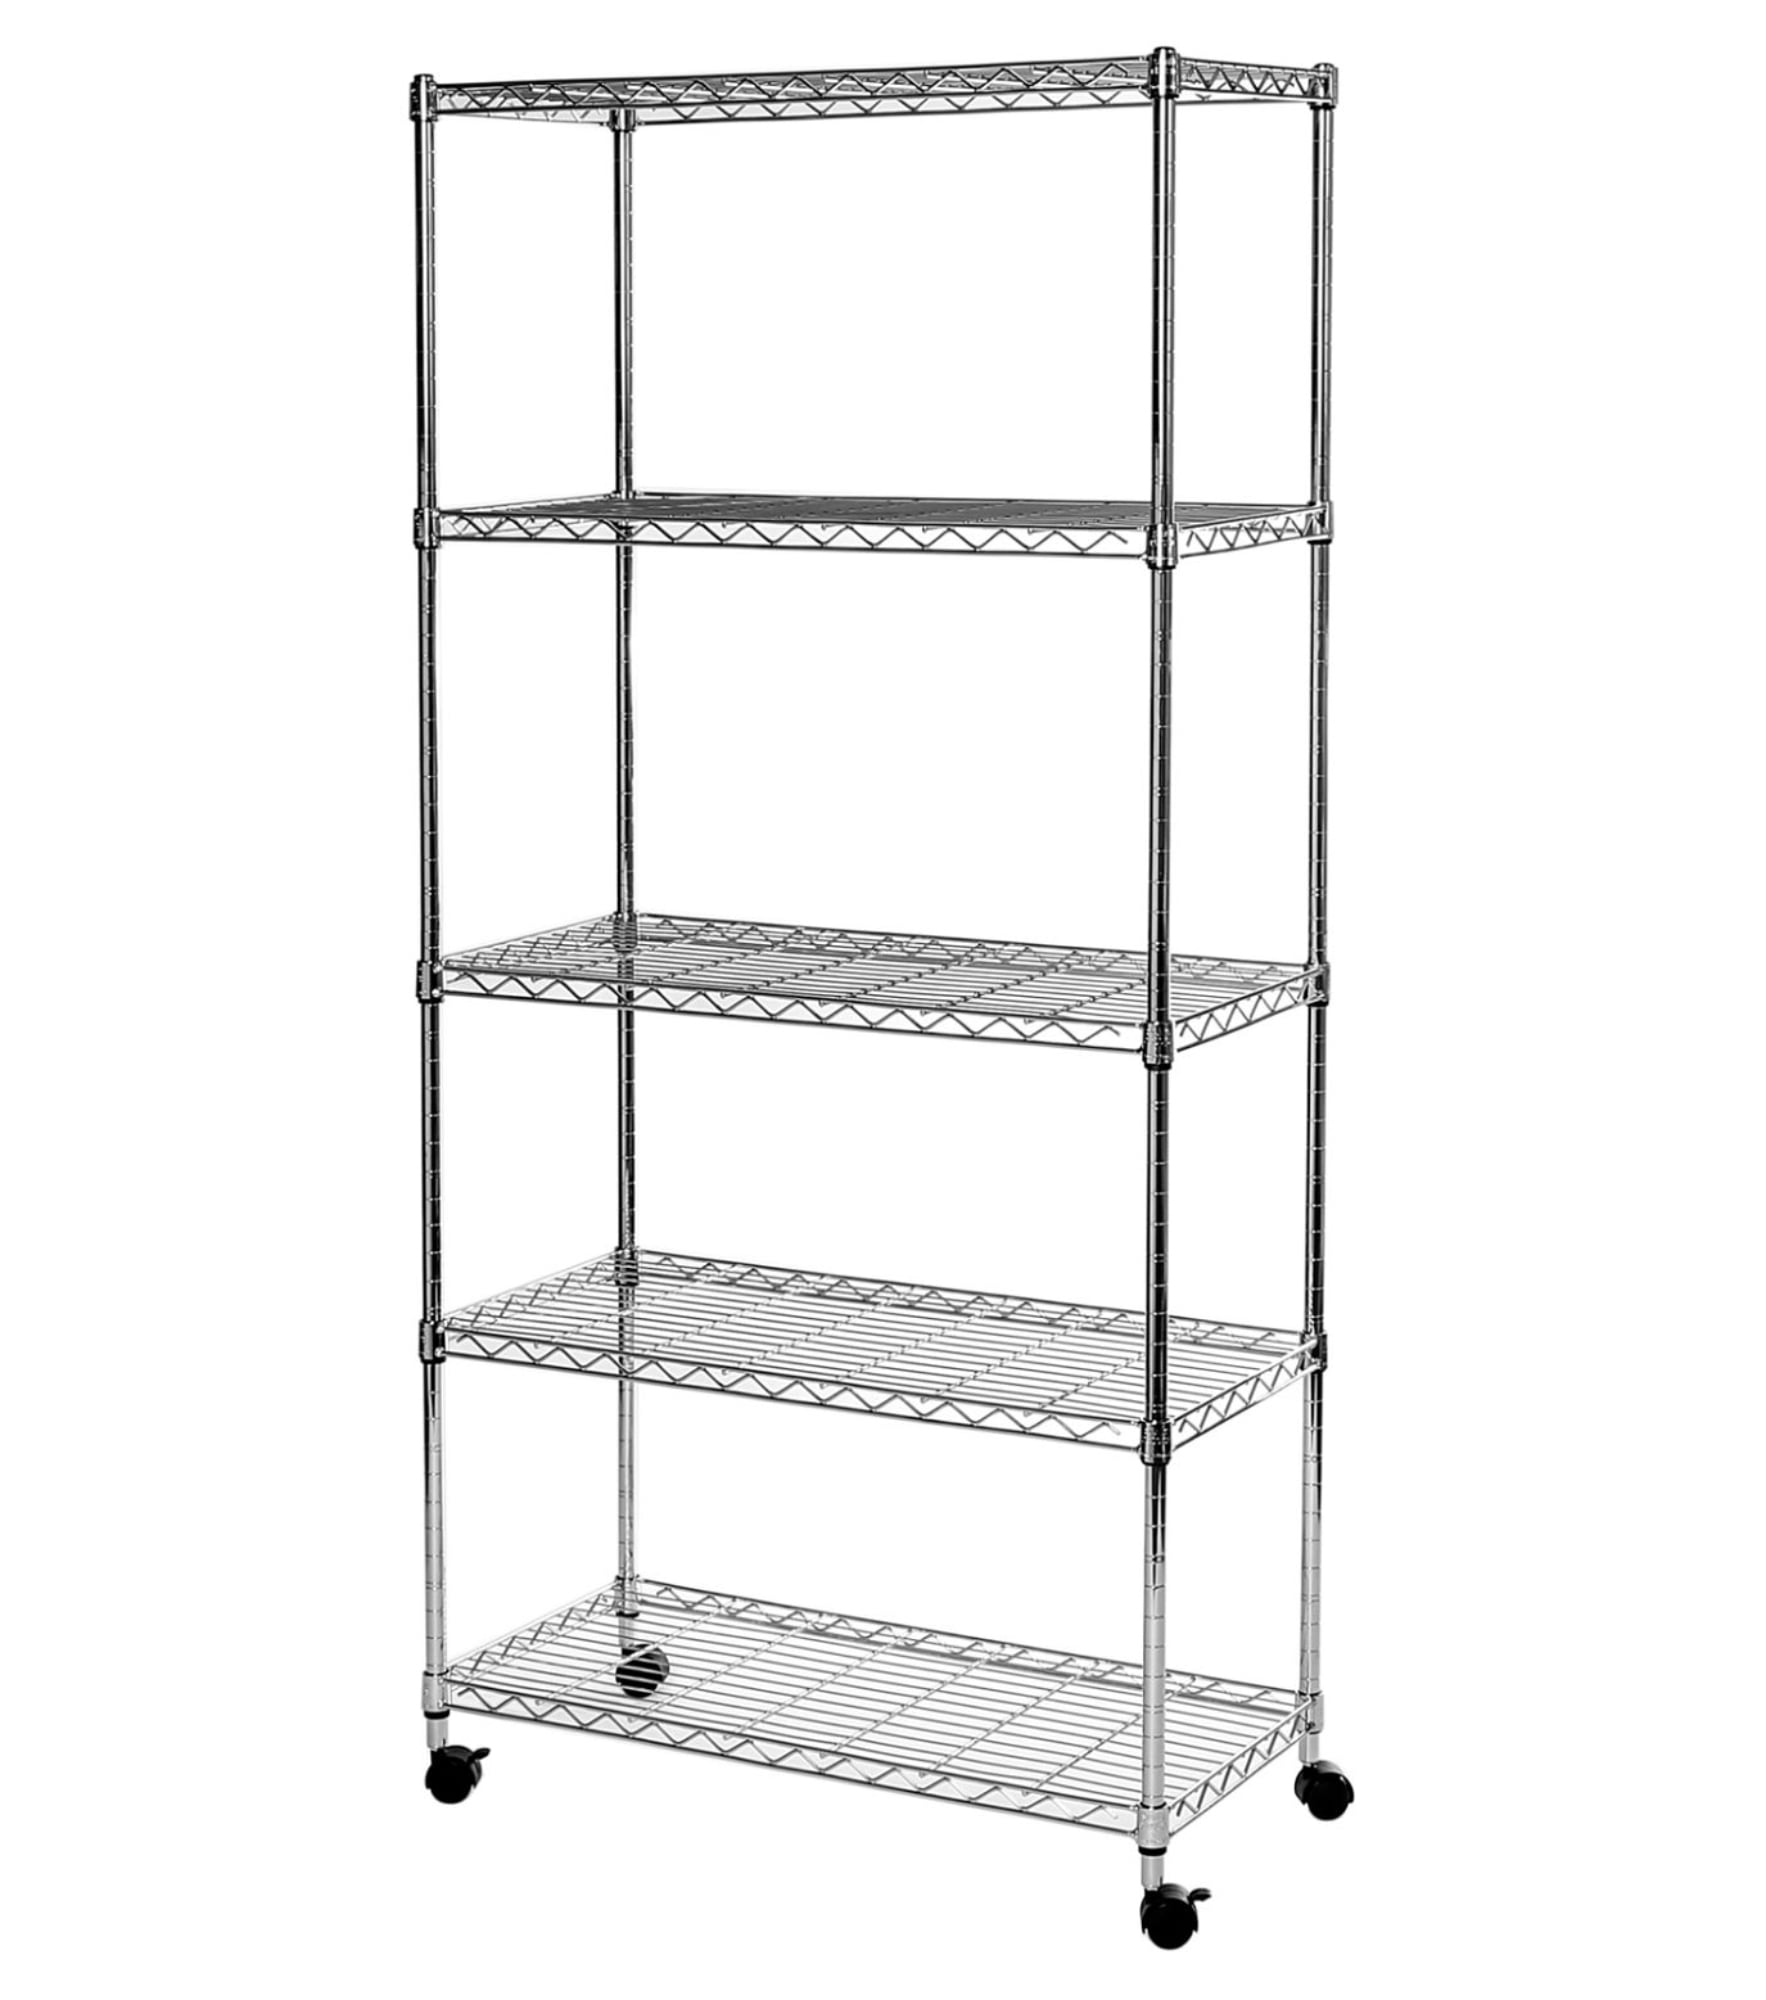 60 H 5 Tier Steel Wire Shelving System, 5 Shelf Chrome Wire Shelving